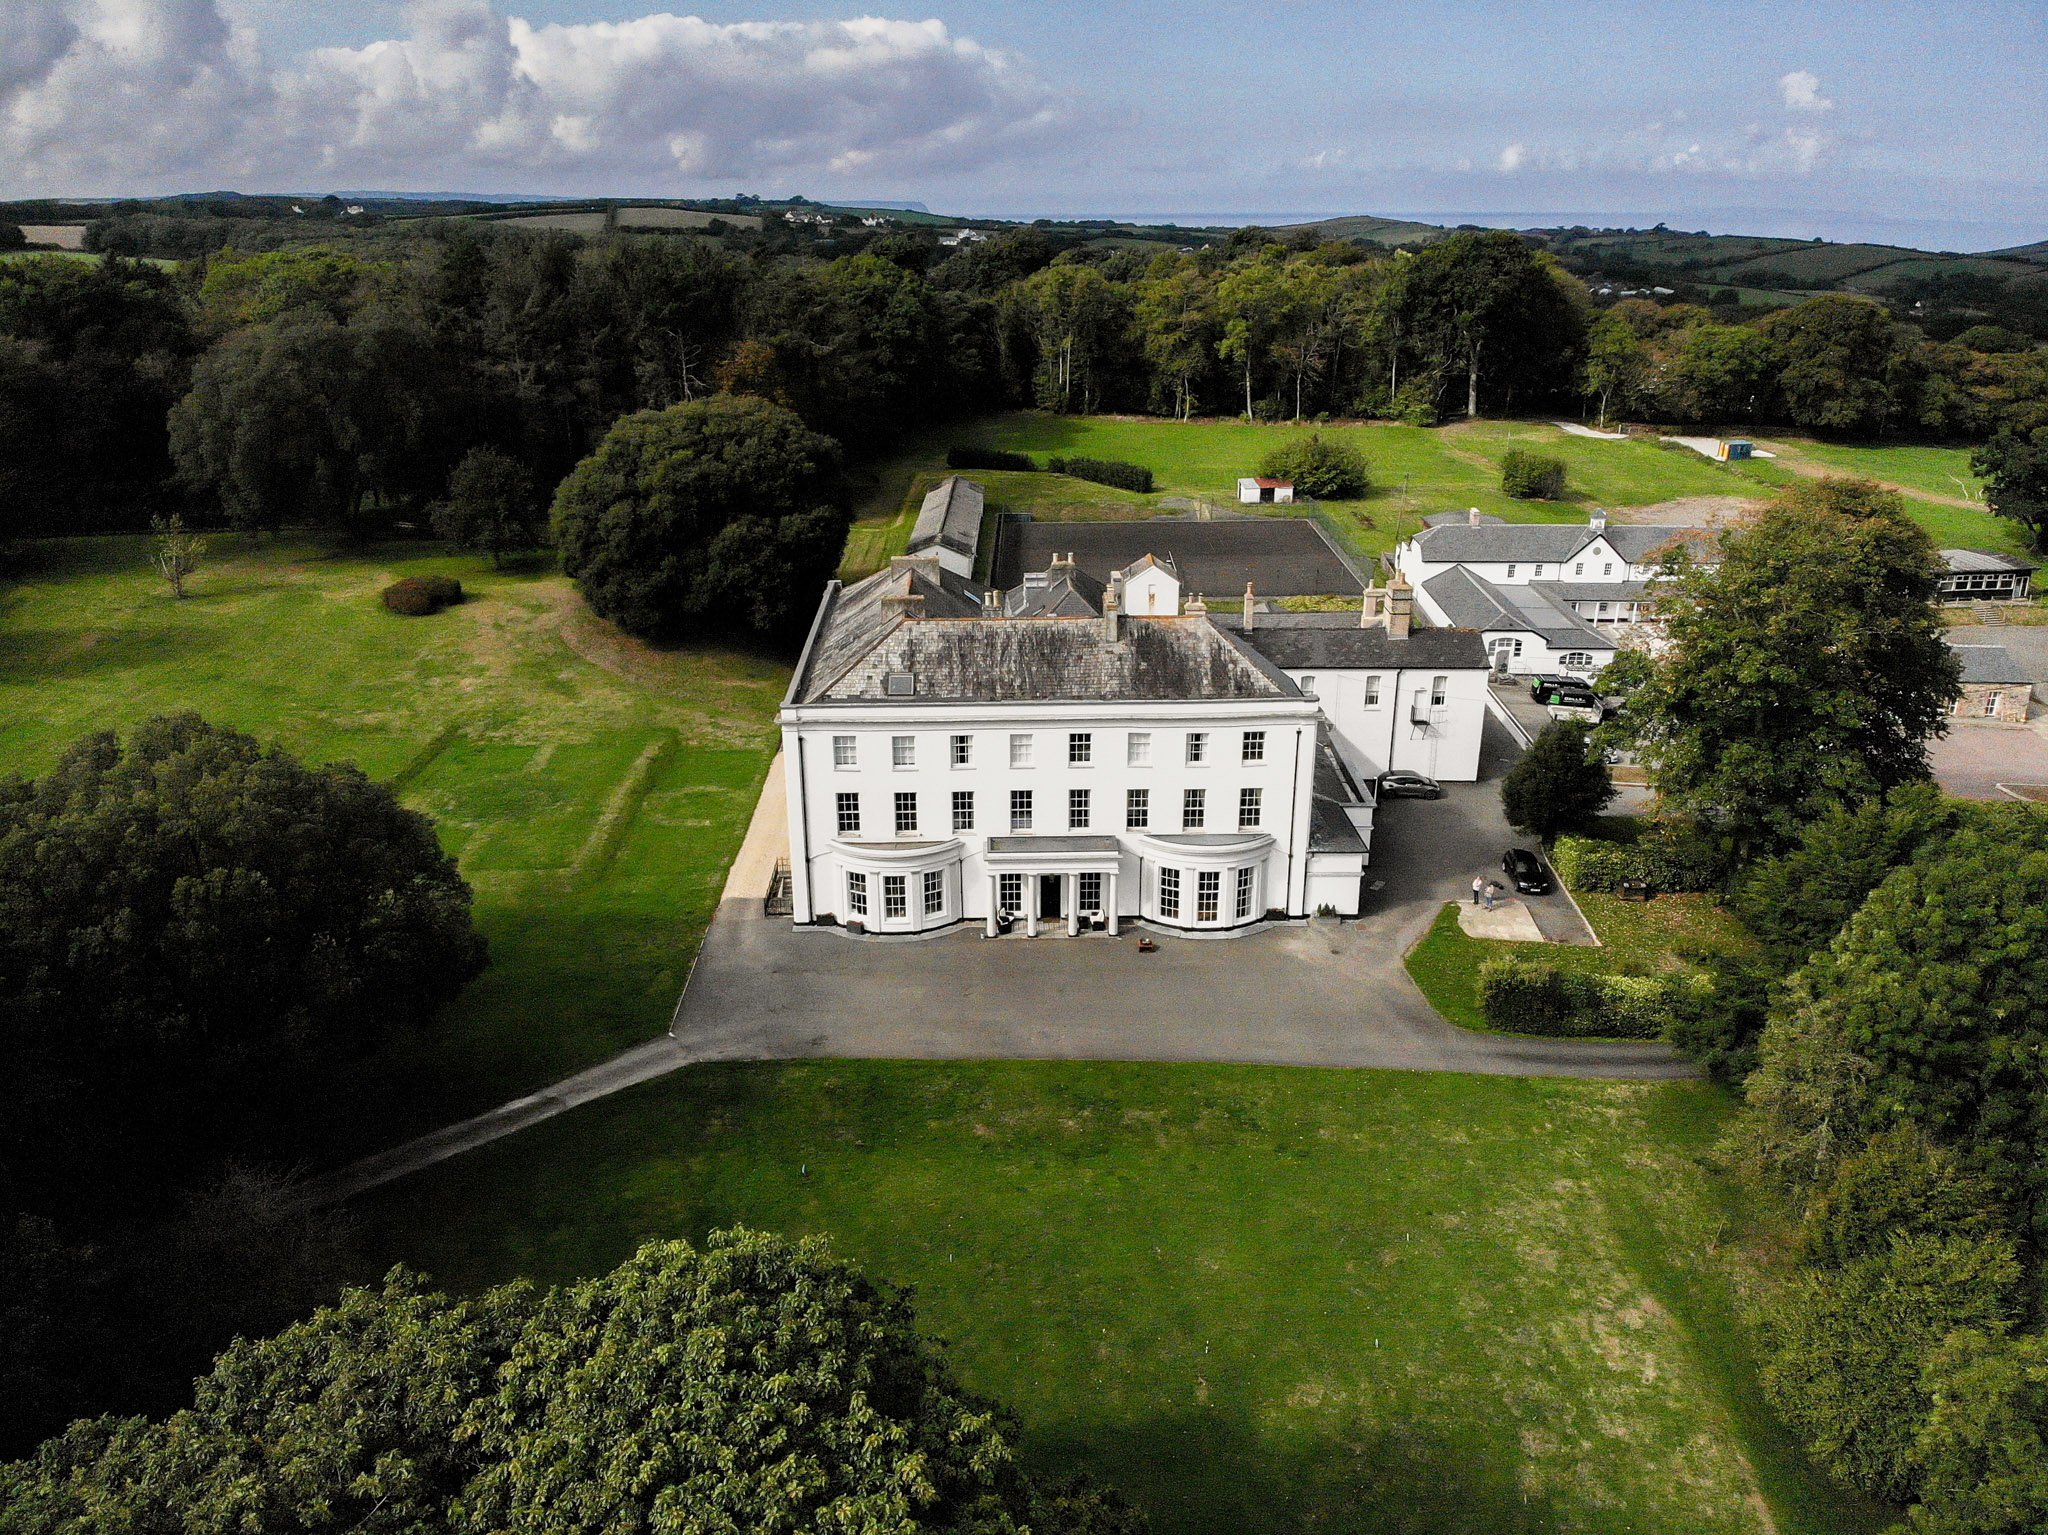 Ariel photograph of the stately home and grounds of the North Devon wedding venue Moreton House.